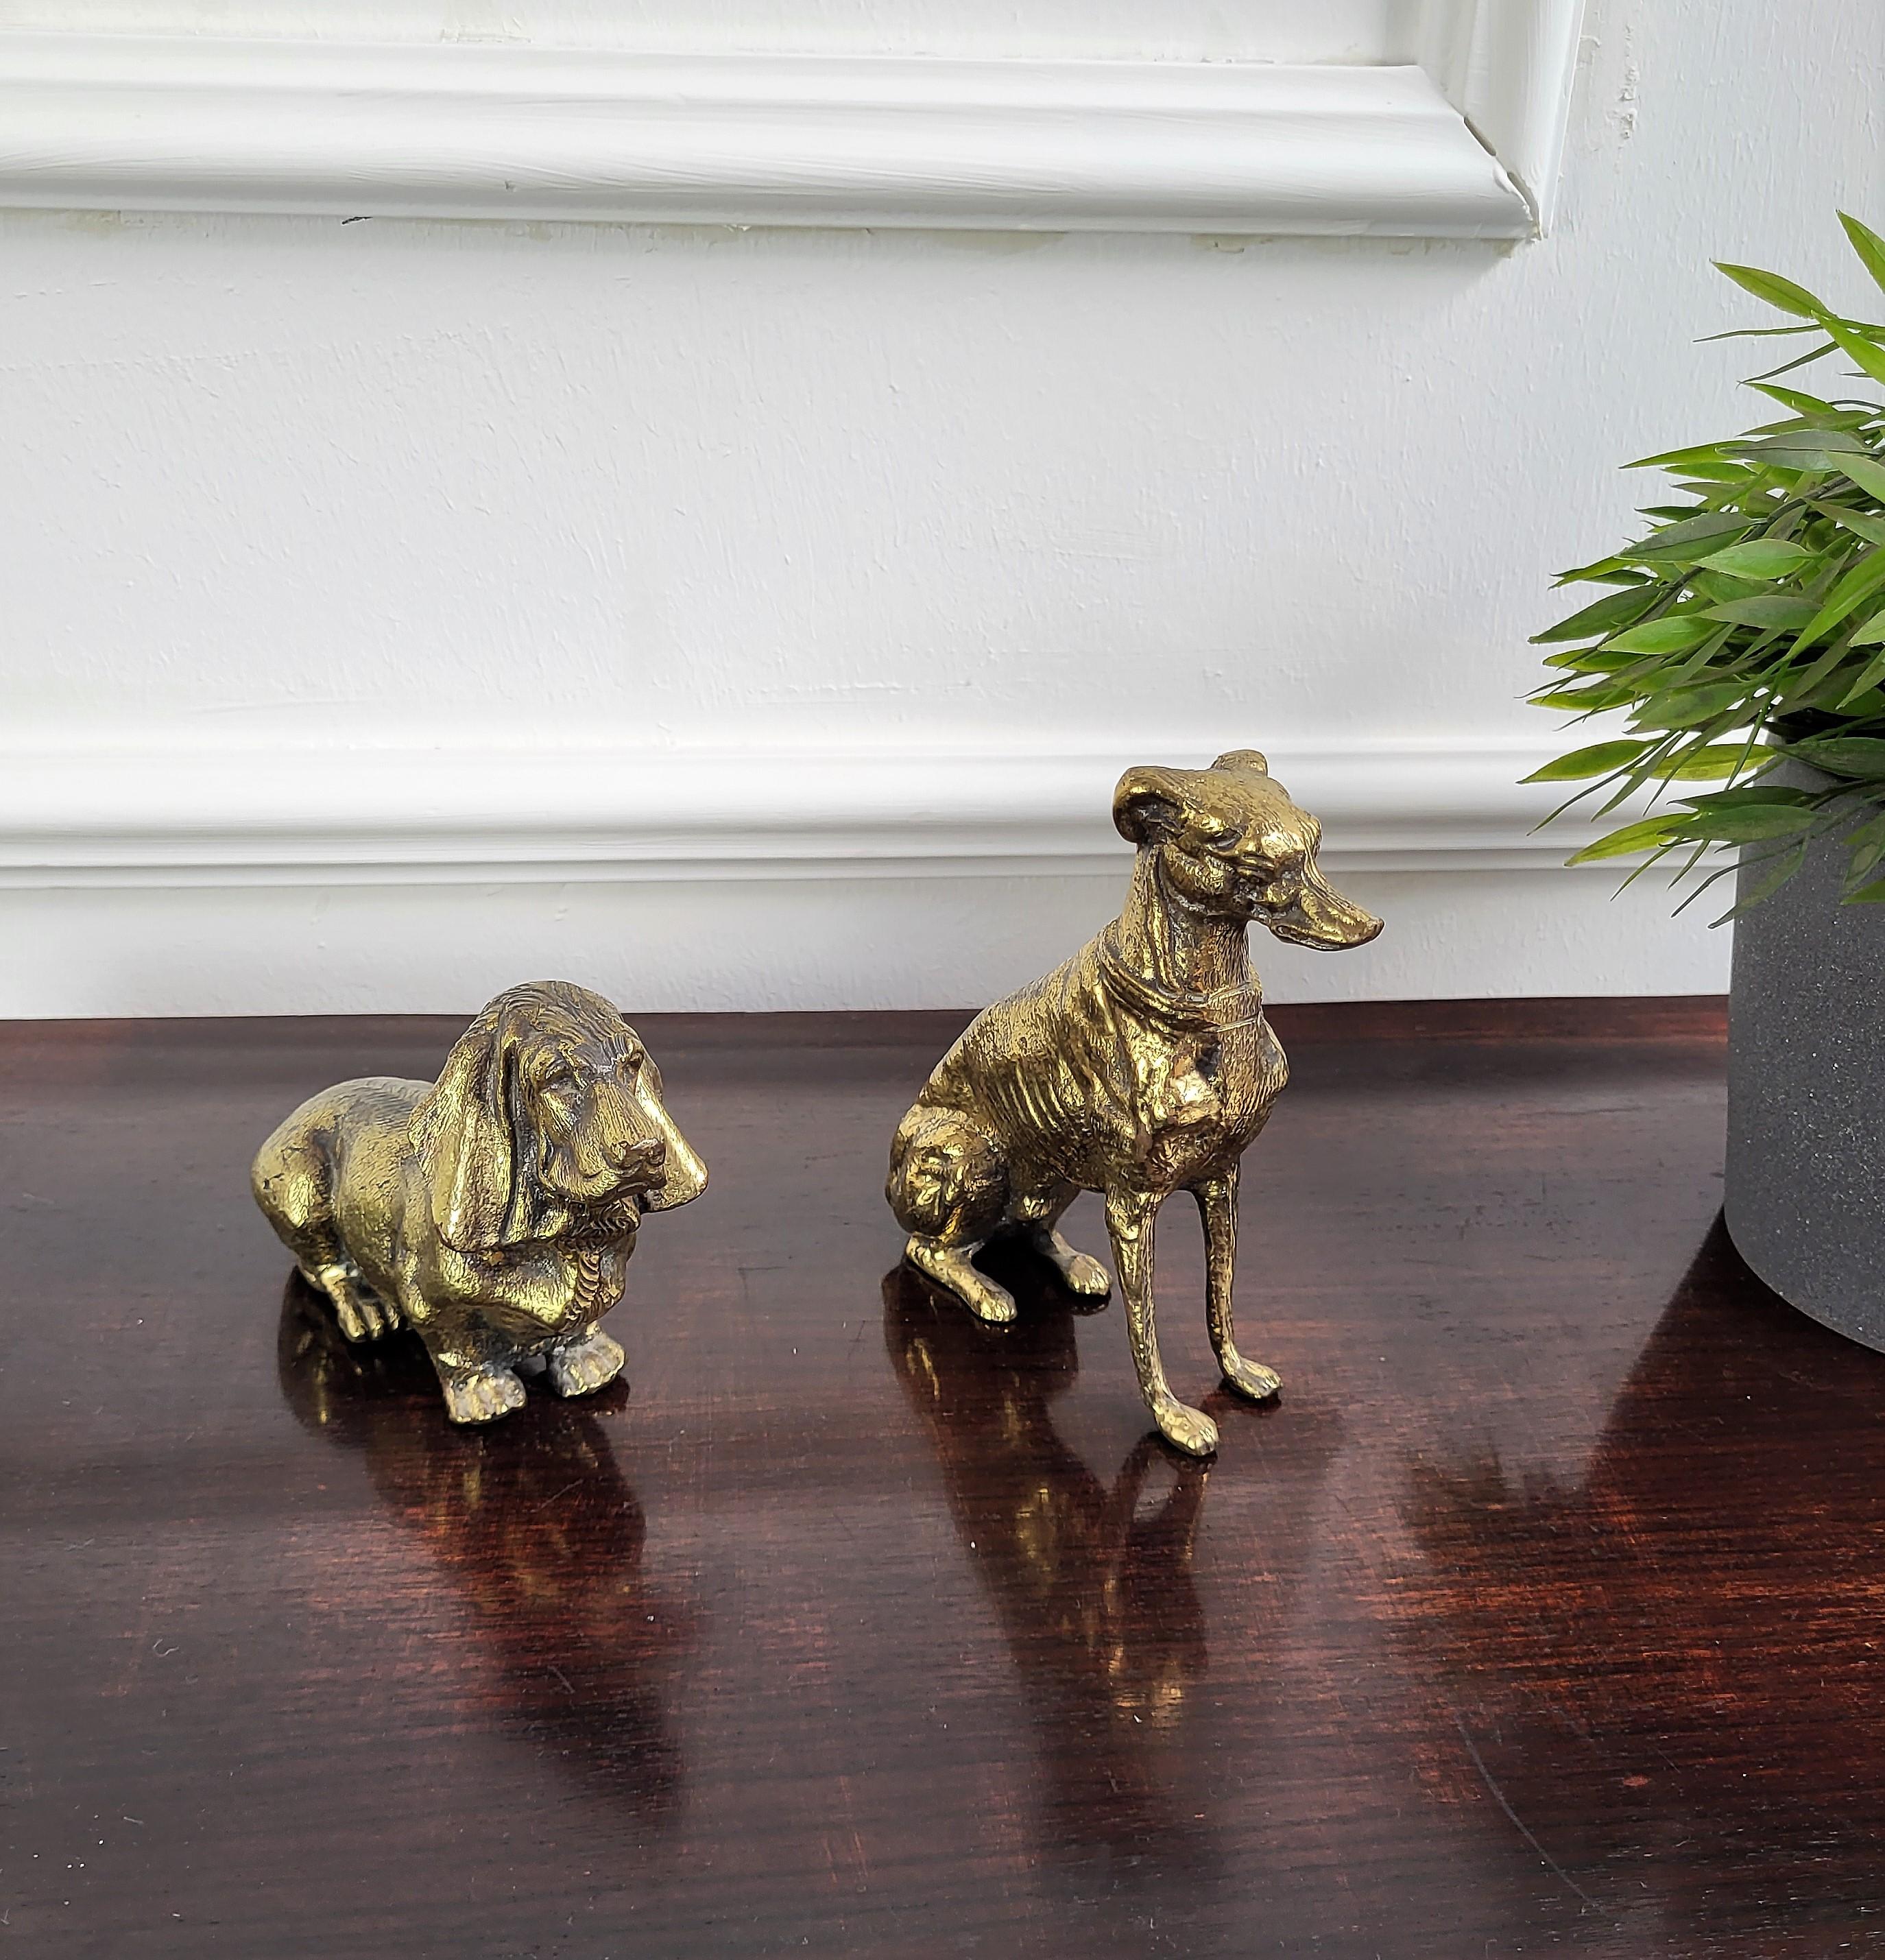 Pair of Italian desk top brass bronze dog sculptures ideal as decorative paperweights or eventually as book holders.